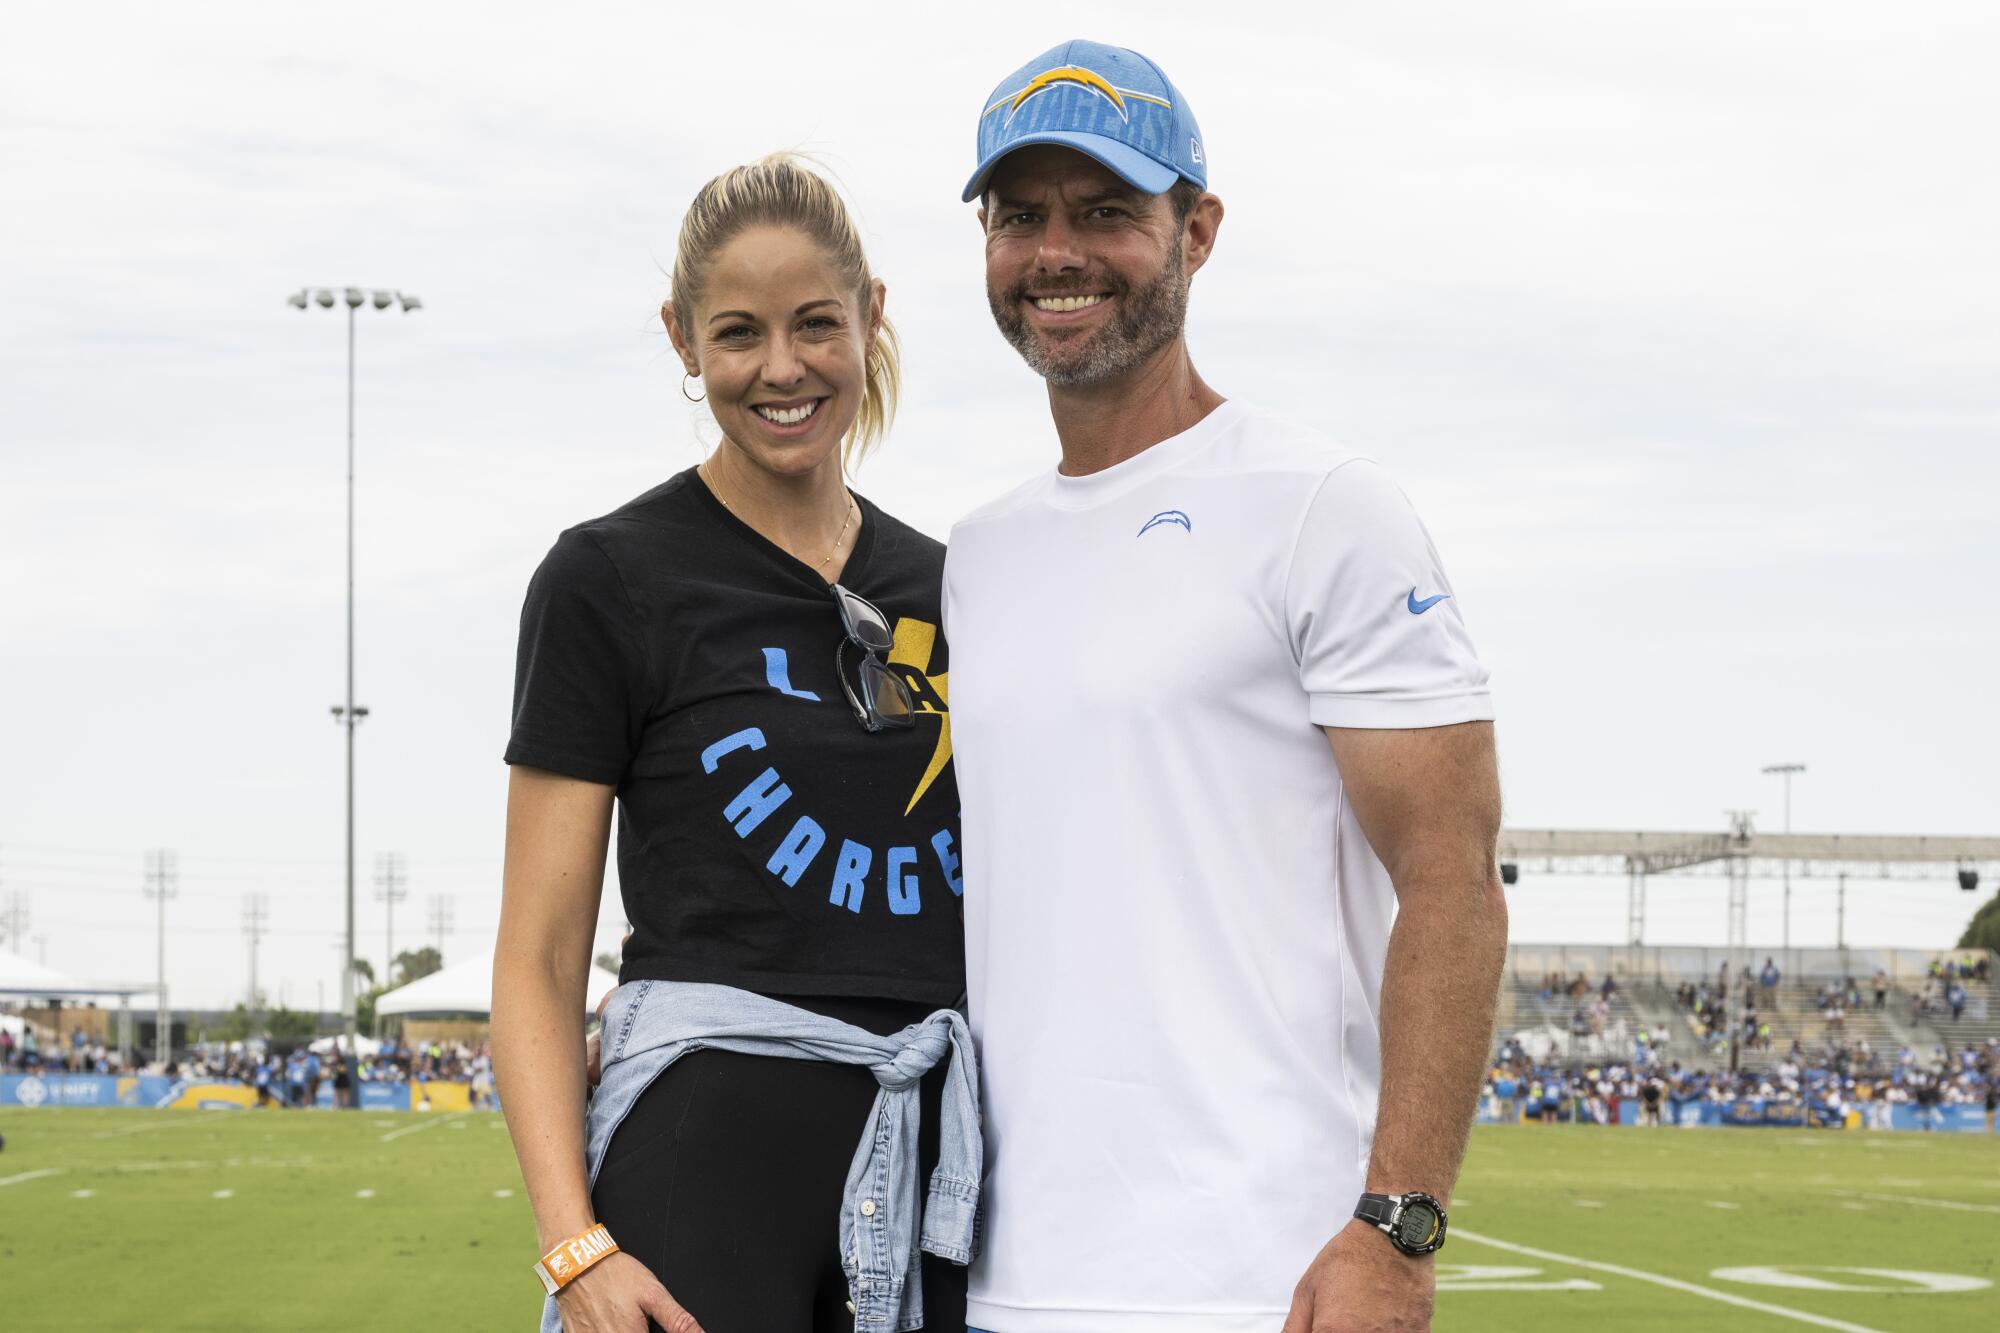 Chargers coach Brandon Staley, right, and his wife Amy smile as they pose for a photo.